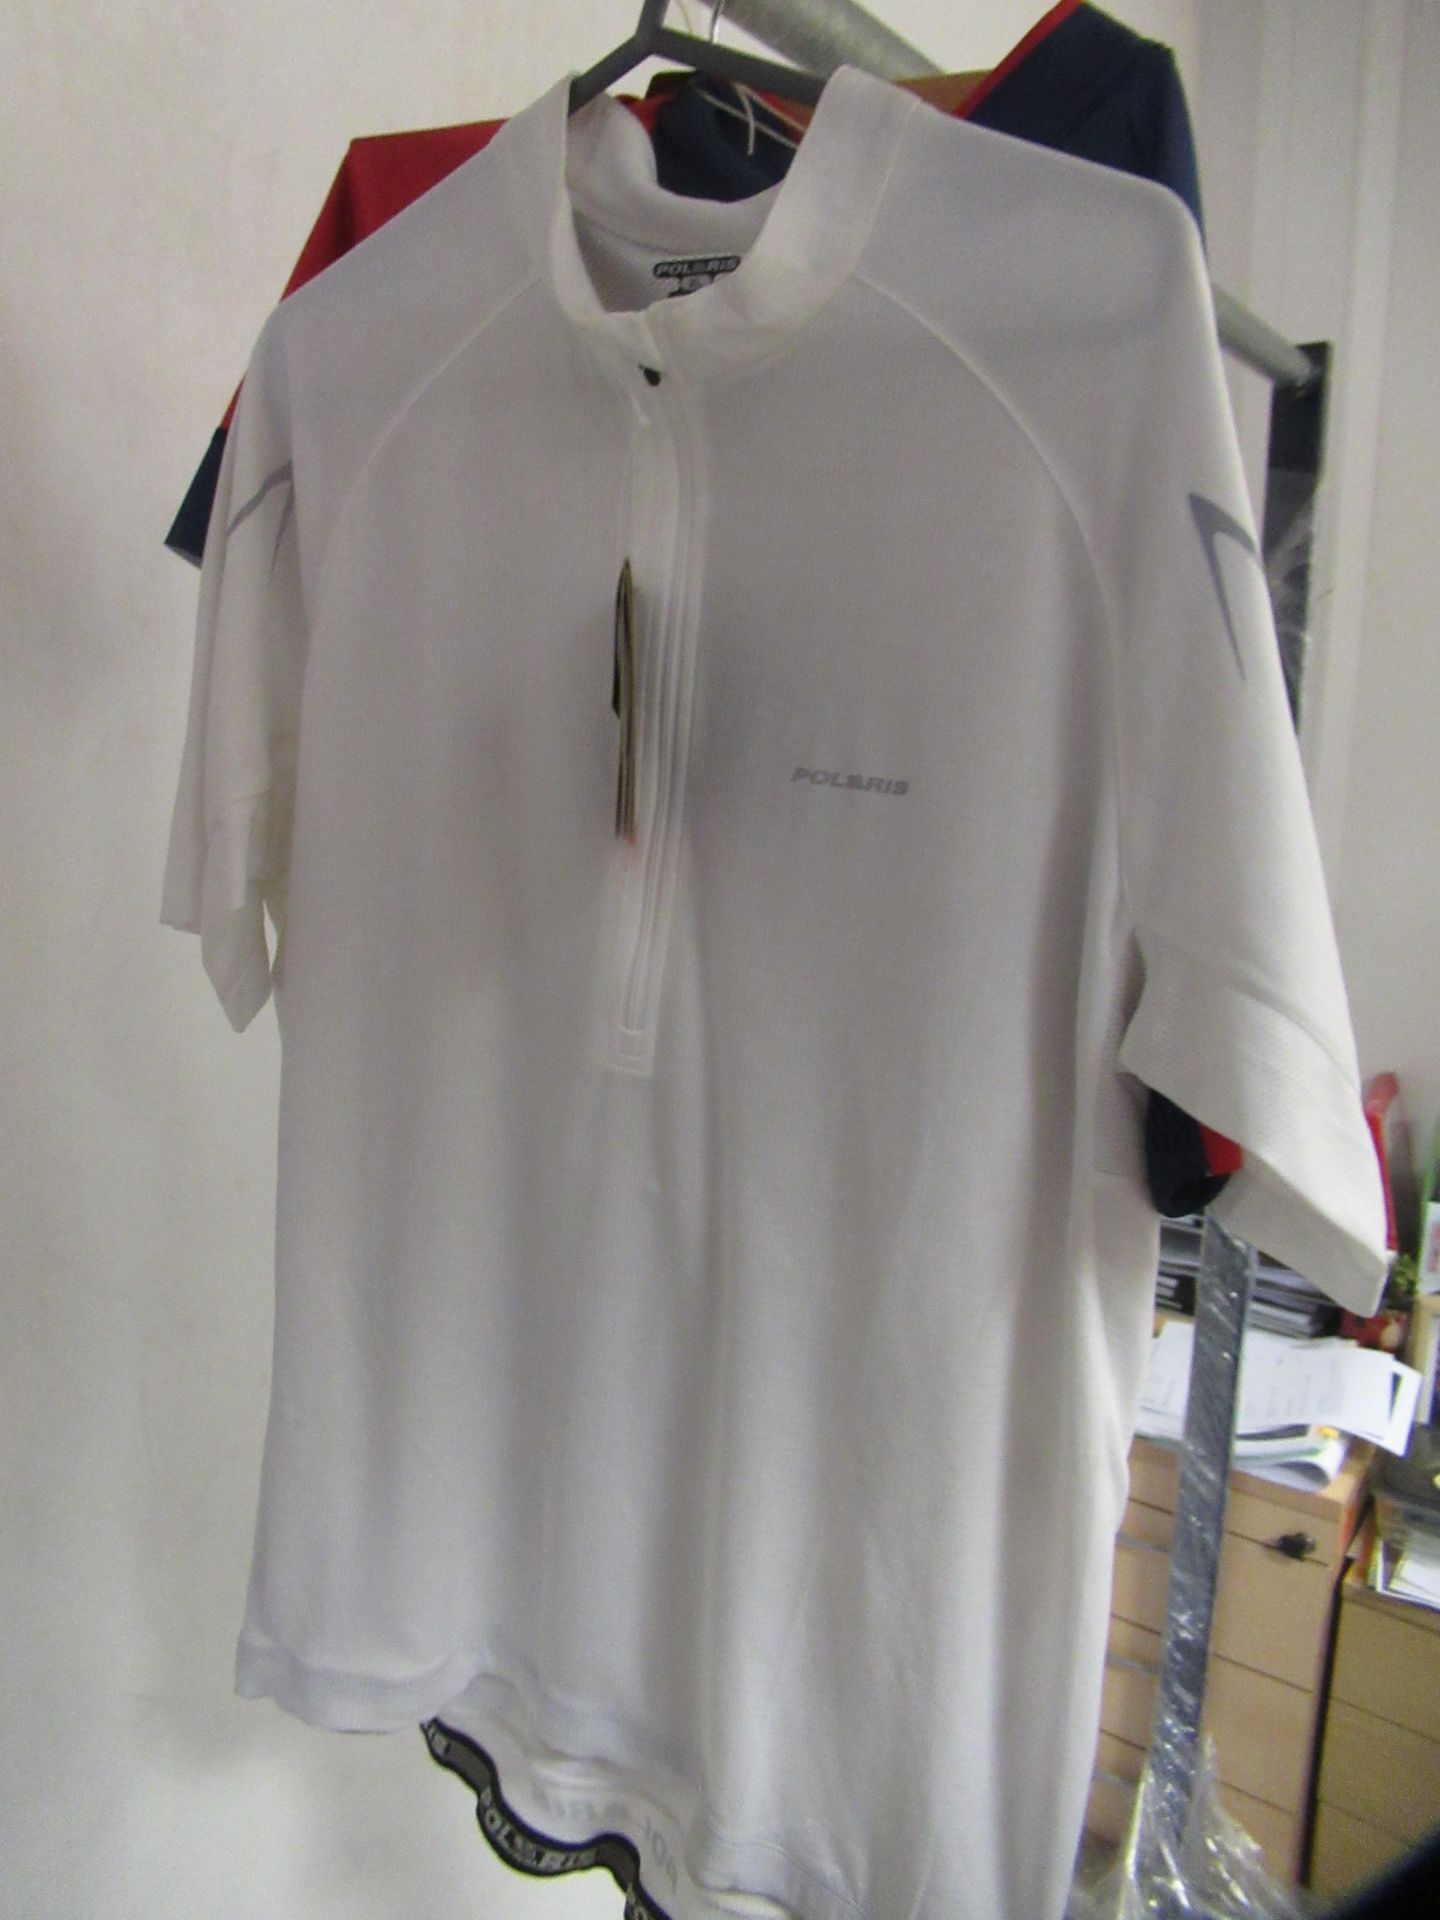 XL Male Cycling Clothes - Image 6 of 7